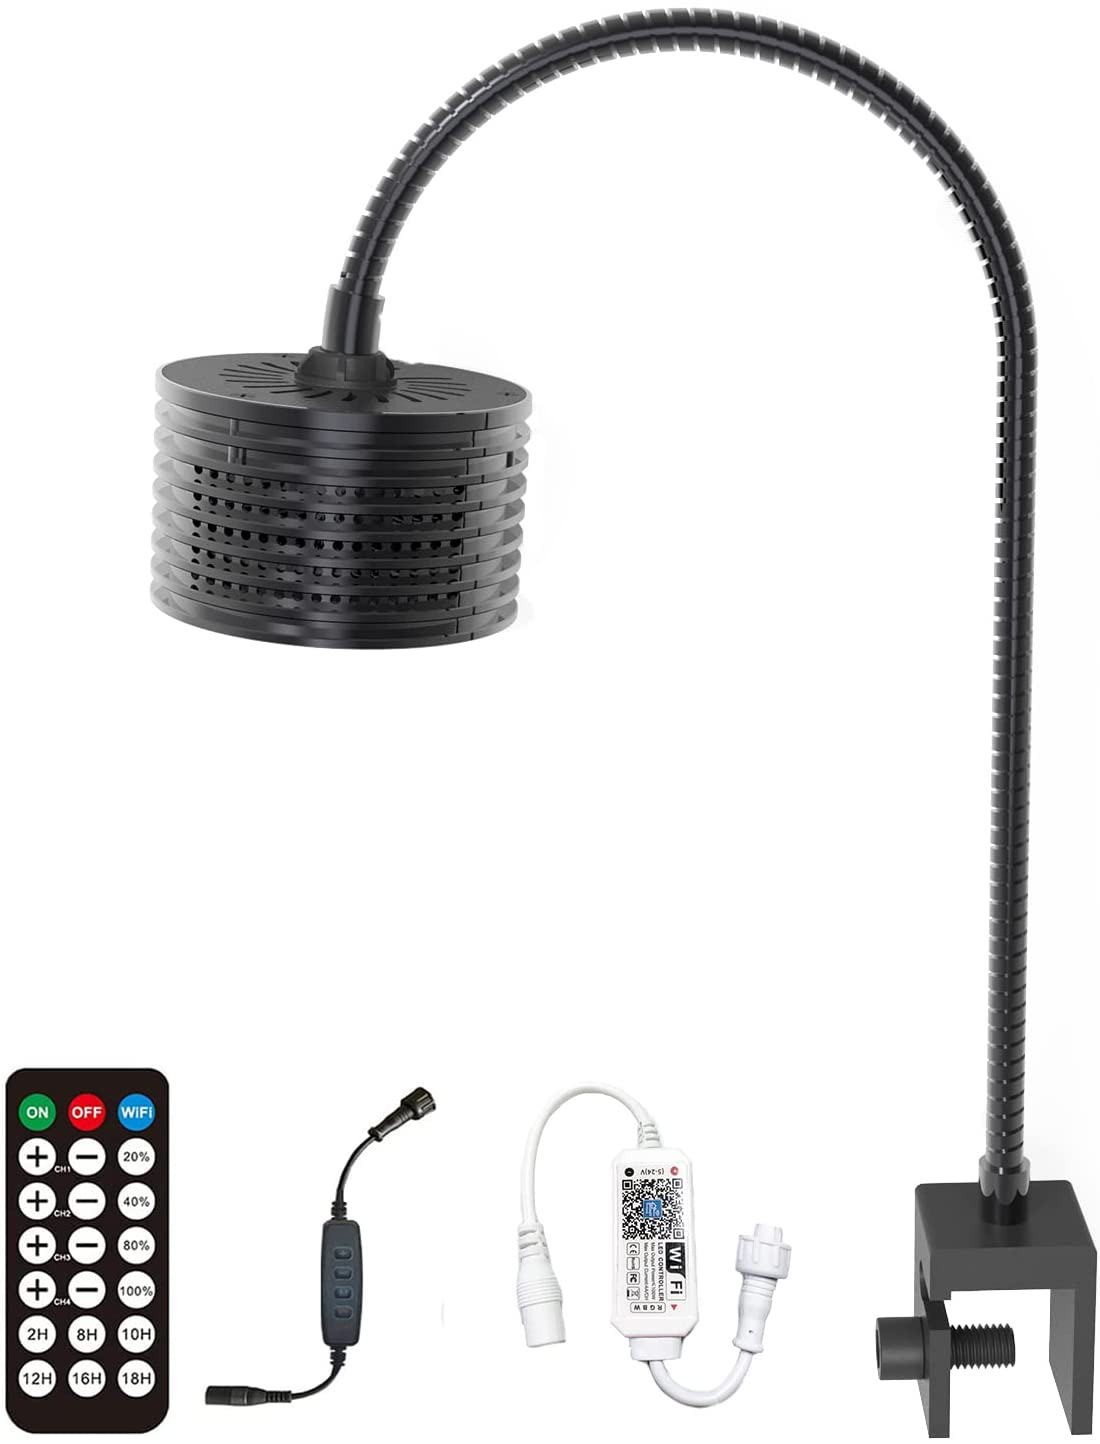 Lominie Aquarium Led Light, 4 Channels Wifi & RF Remote Dimmable 30W Fish Tank Light Pixie 30 with Bracket for Saltwater Fish and Reef Coral Tank (P30 30W Saltwater)